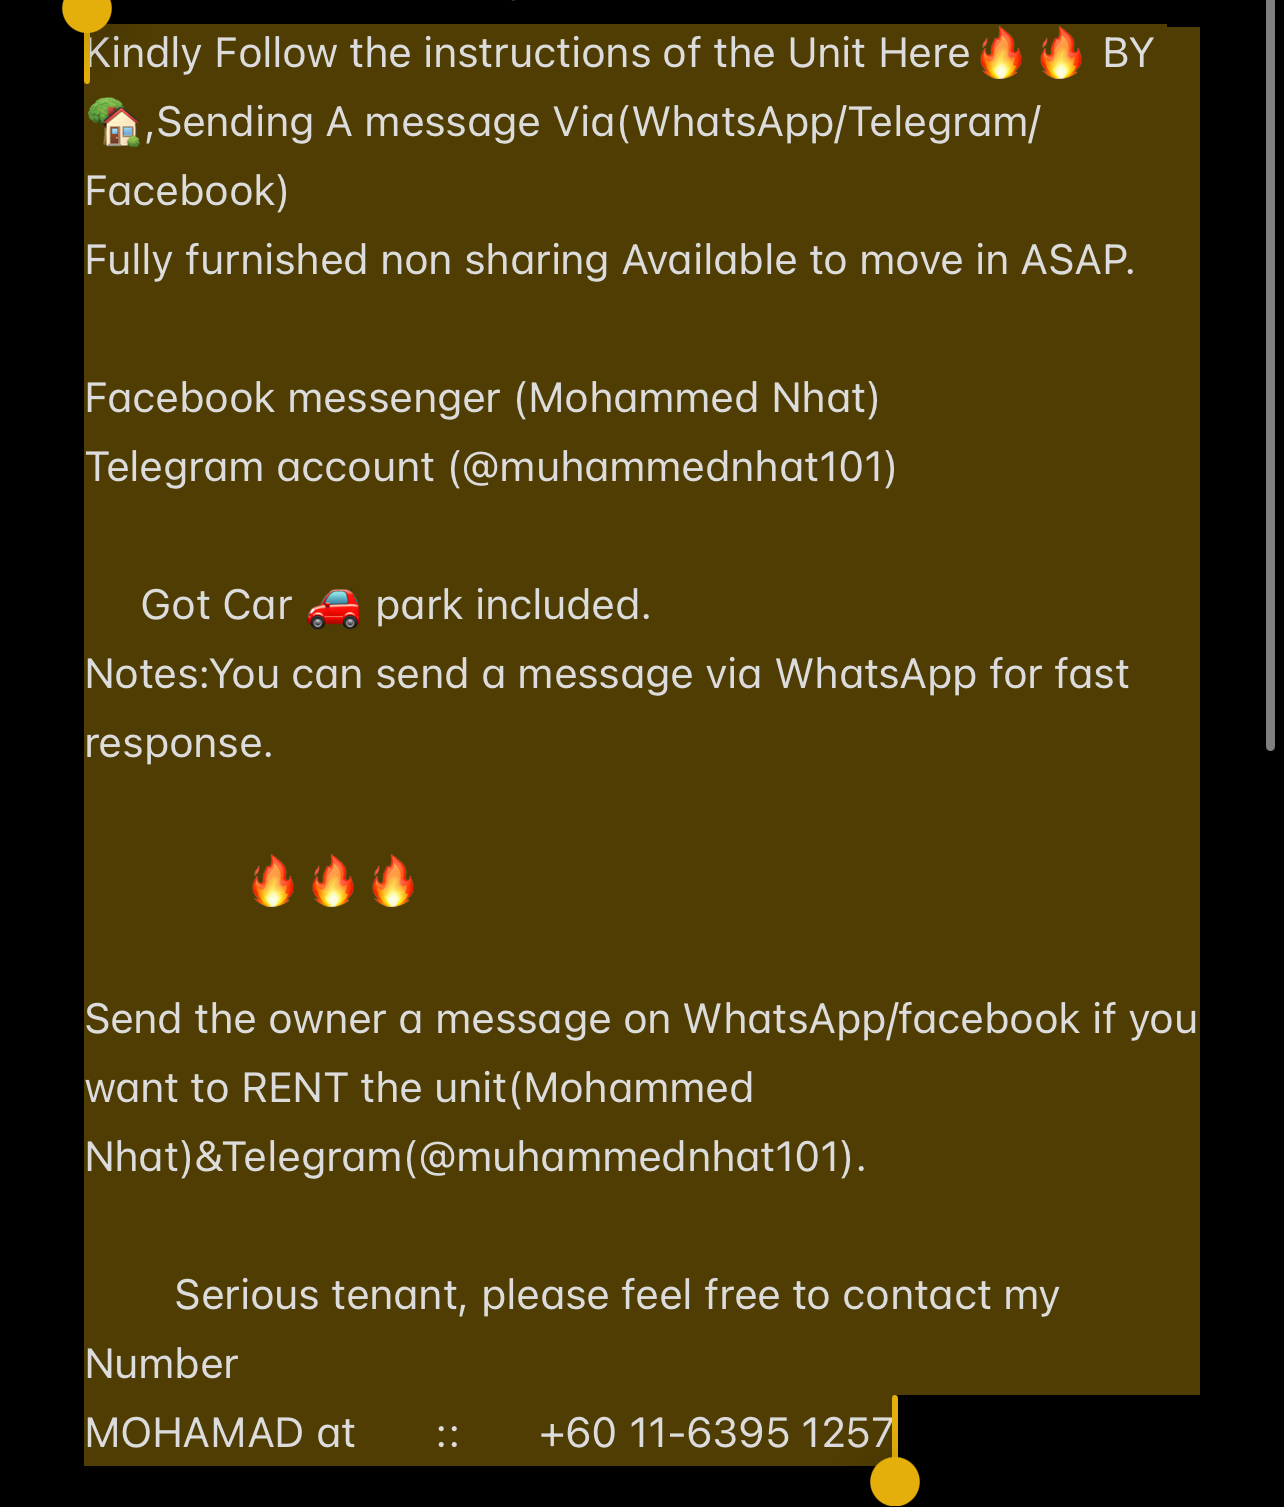 room for rent, studio, gadek, Send the owner a message on WhatsApp/facebook if you want to RENT the unit(Mohammed Nhat)&Telegram(@muhammednhat101)